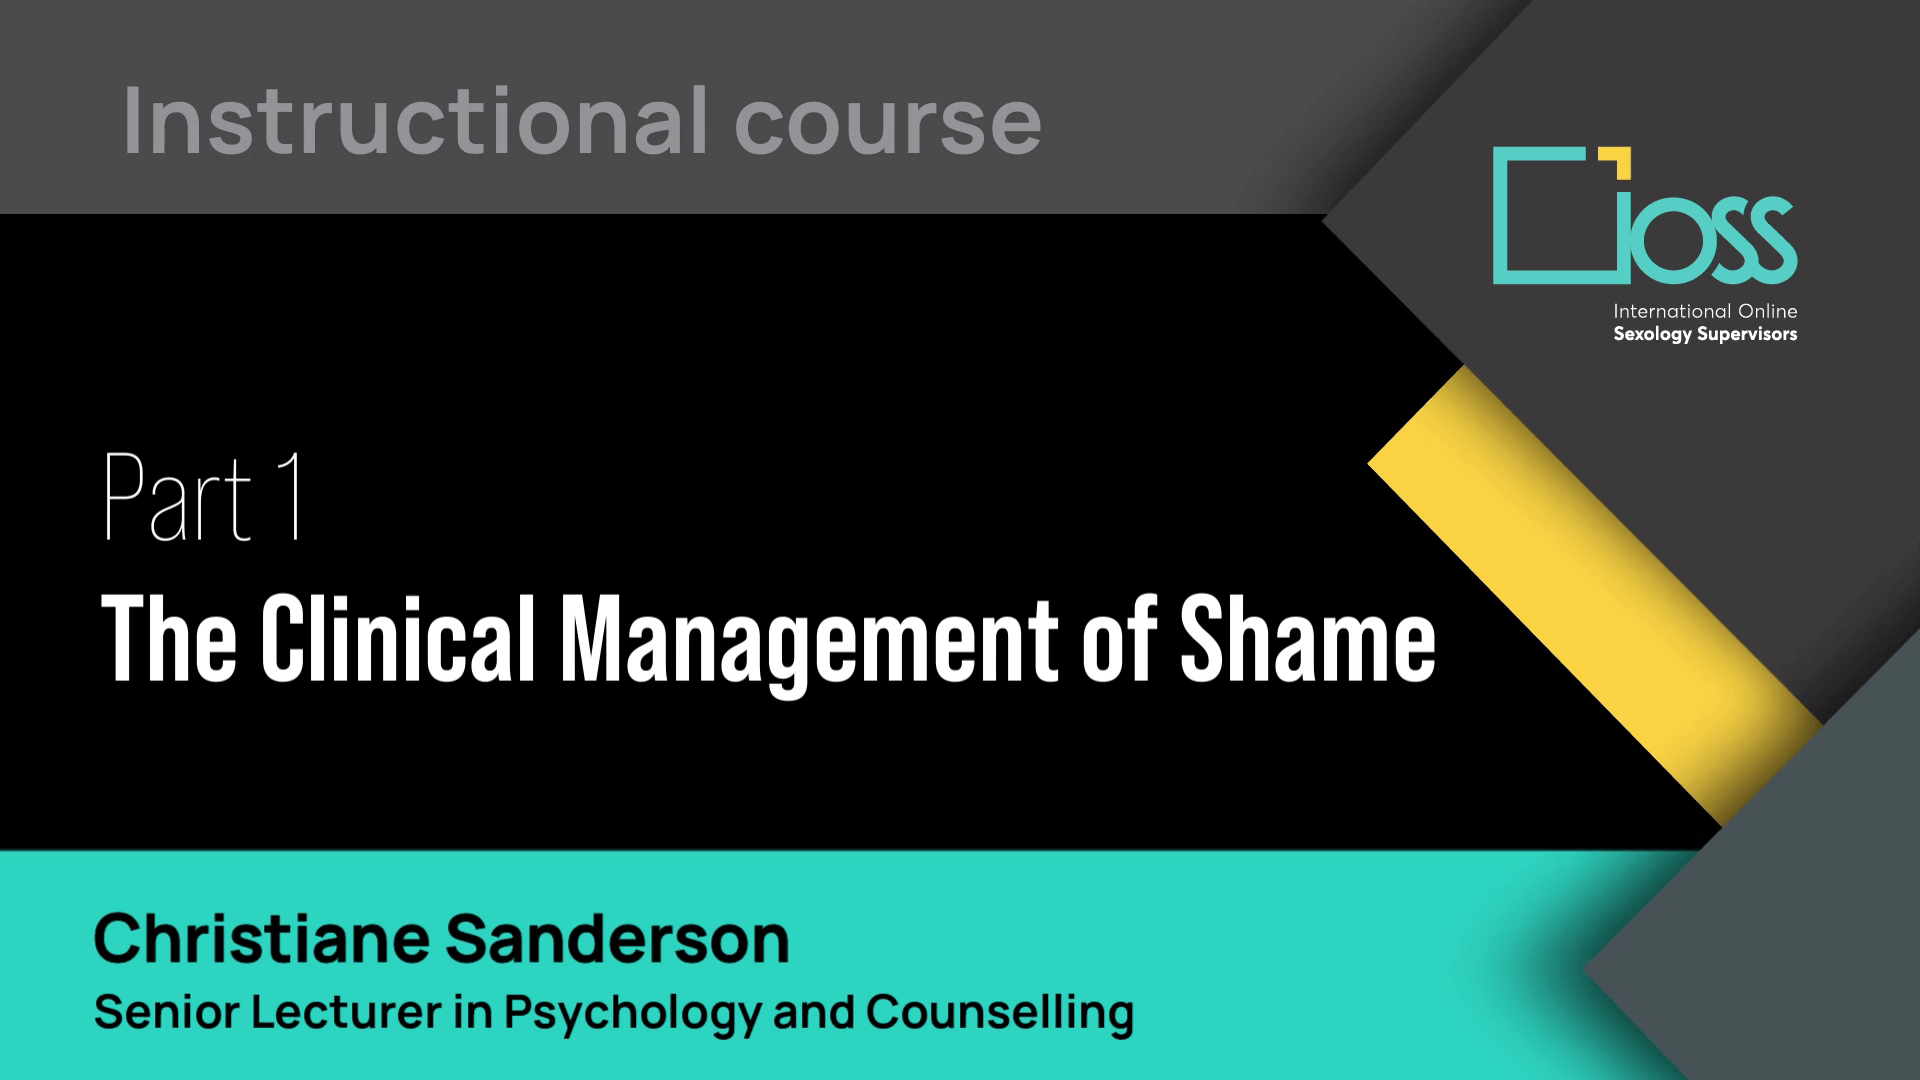 Part 1 The Clinical Management of Shame (Part 1 & 2)